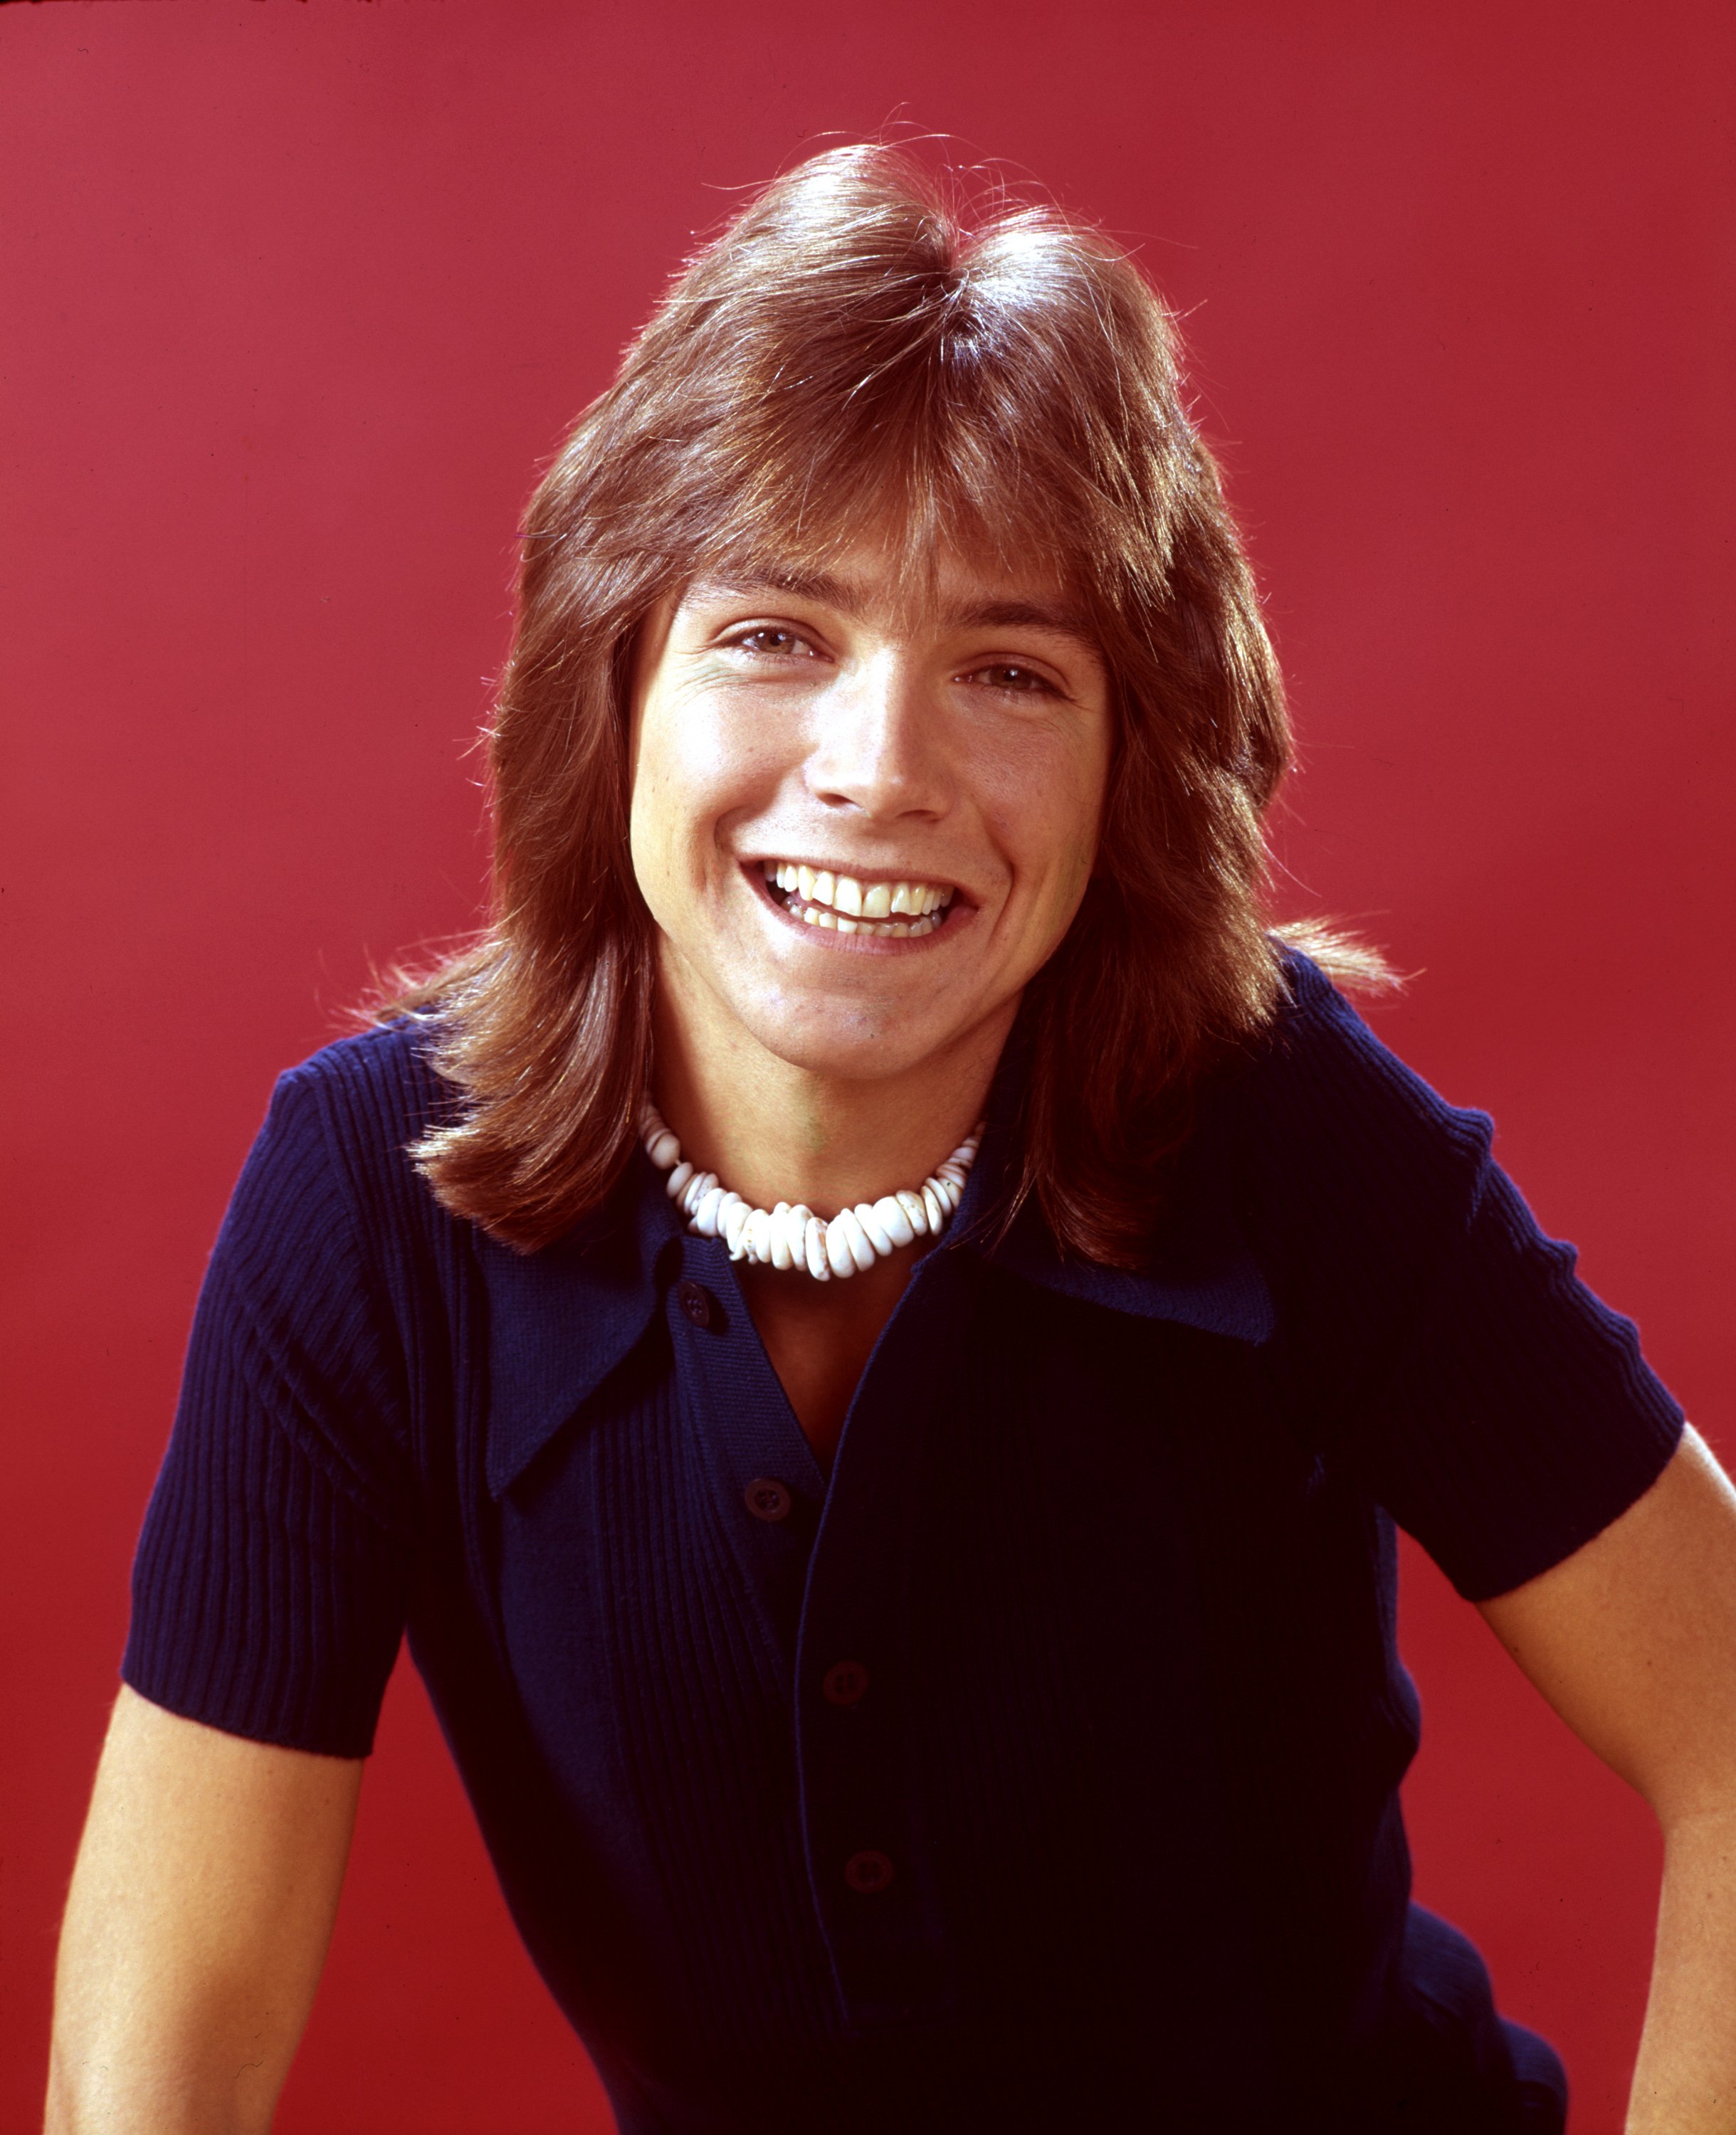 David Cassidy aka Keith Partridge from "The Partridge Family" | Source: Getty Images